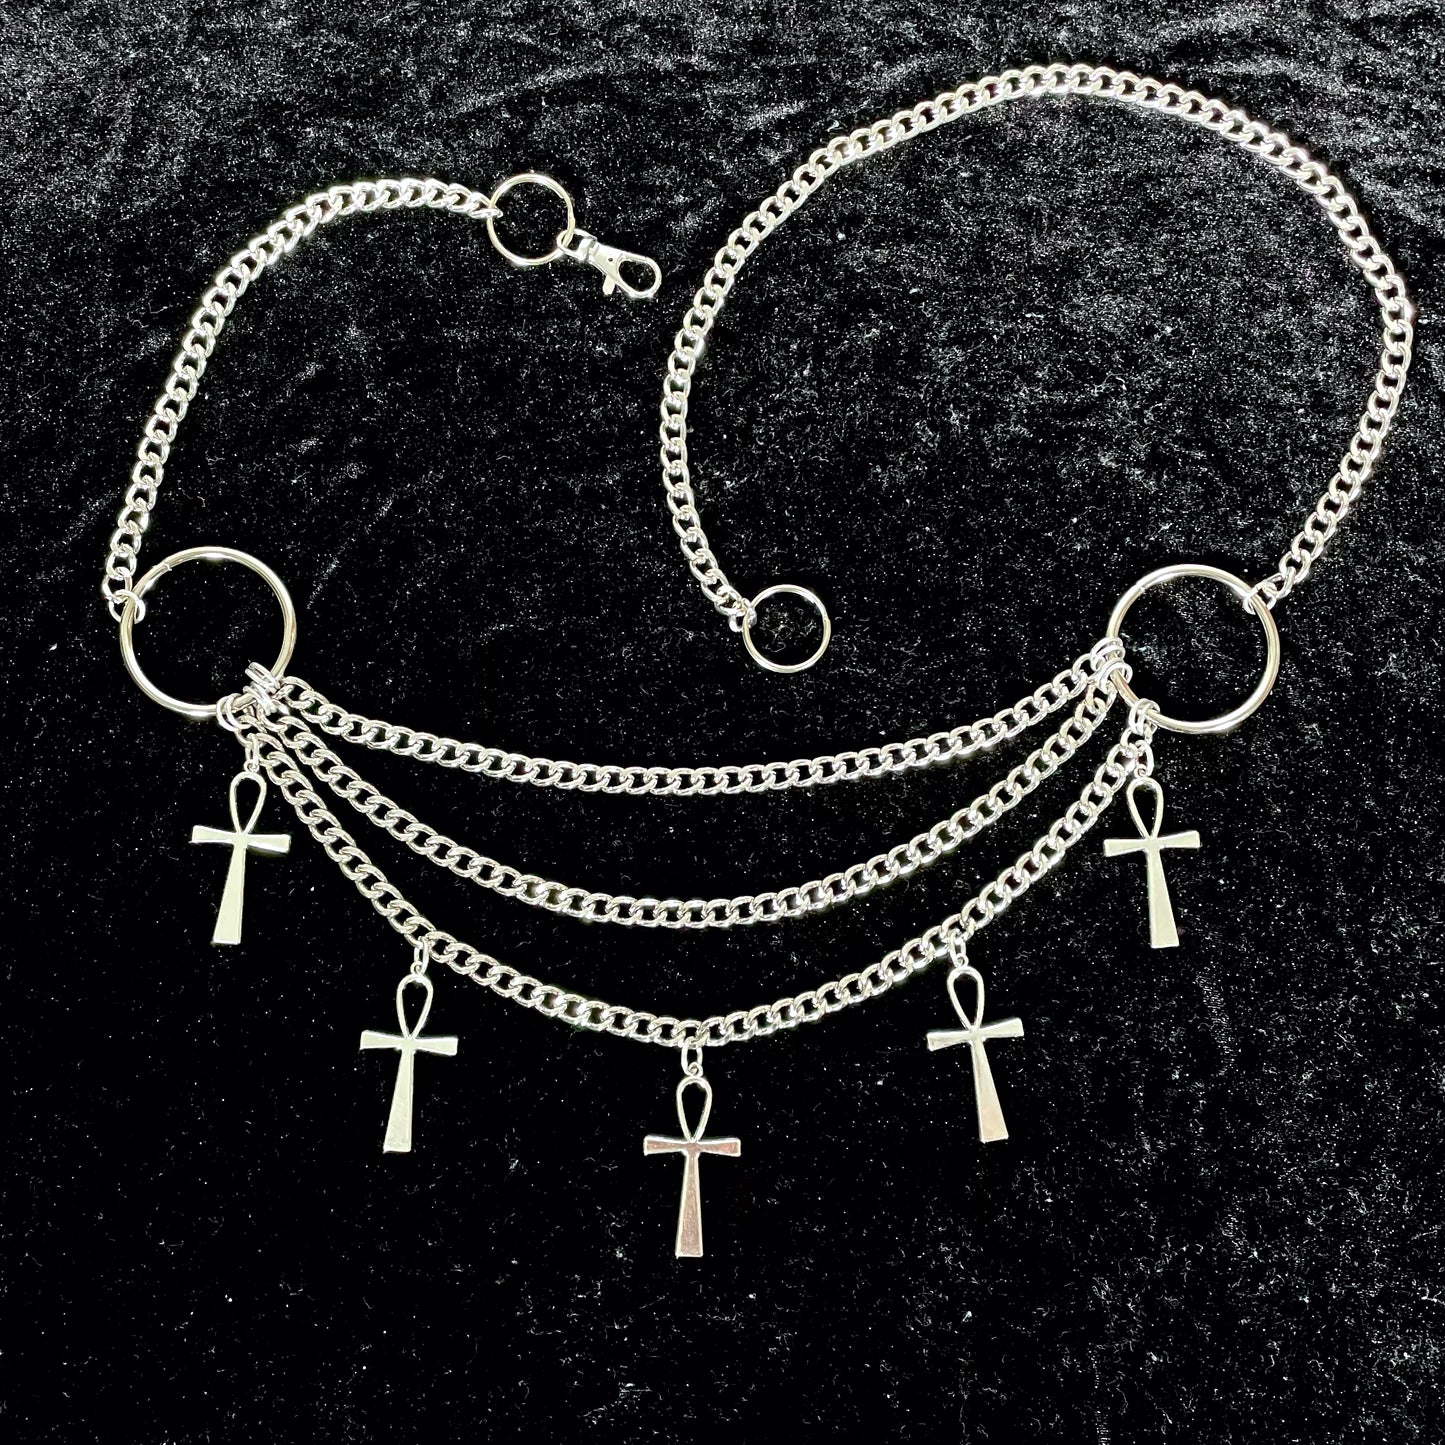 Ankh cross o-ring chain belt occult egyptian goth tradgoth deathrock punk industrial witch 